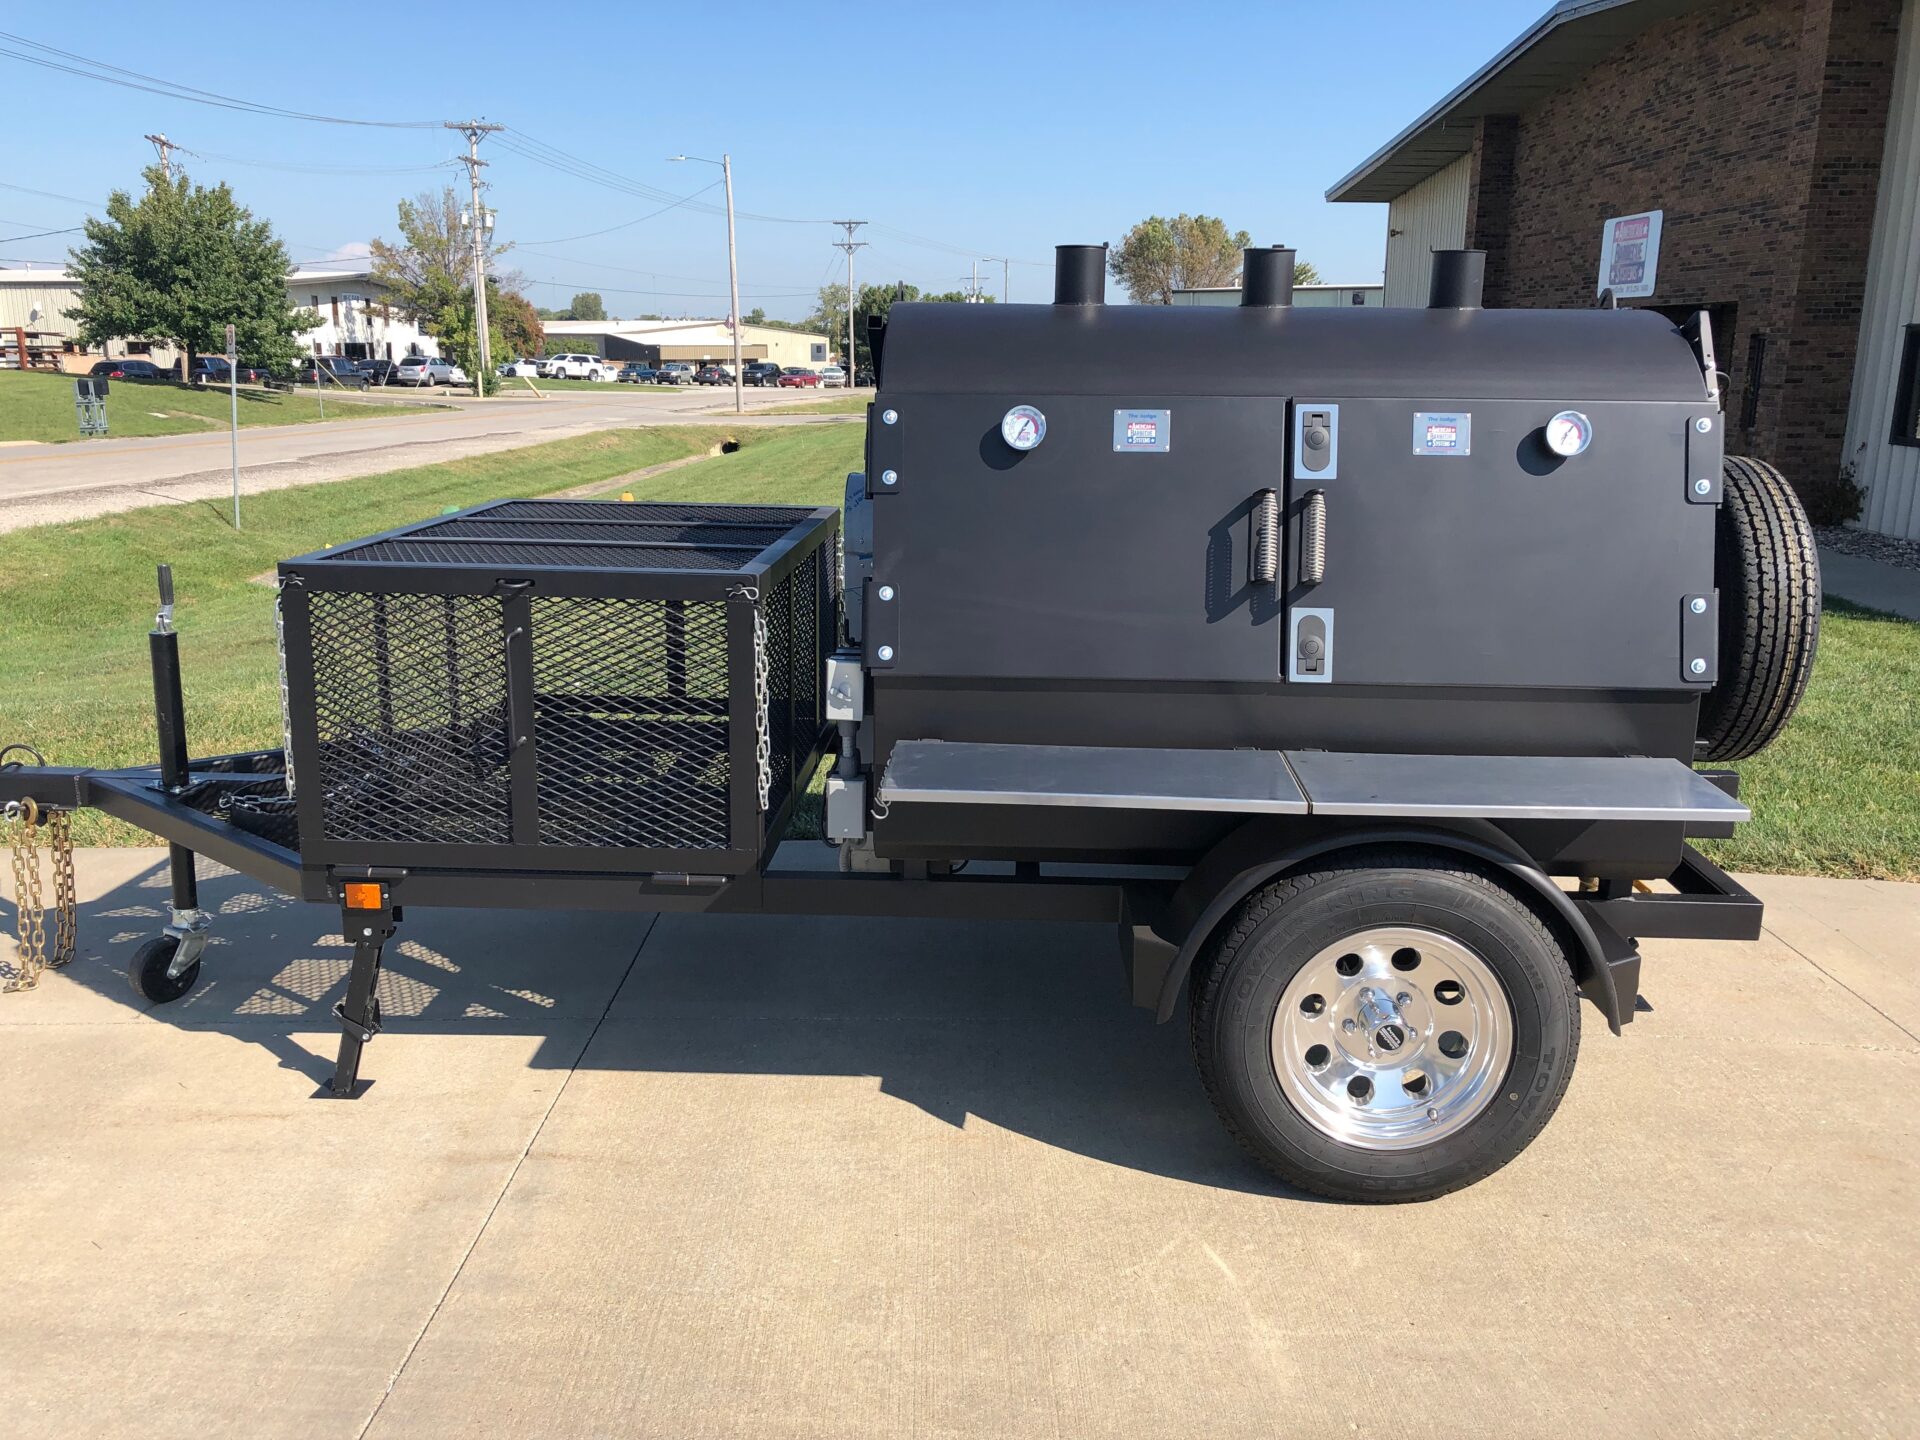 ABS 5-foot meat smoker with storage box